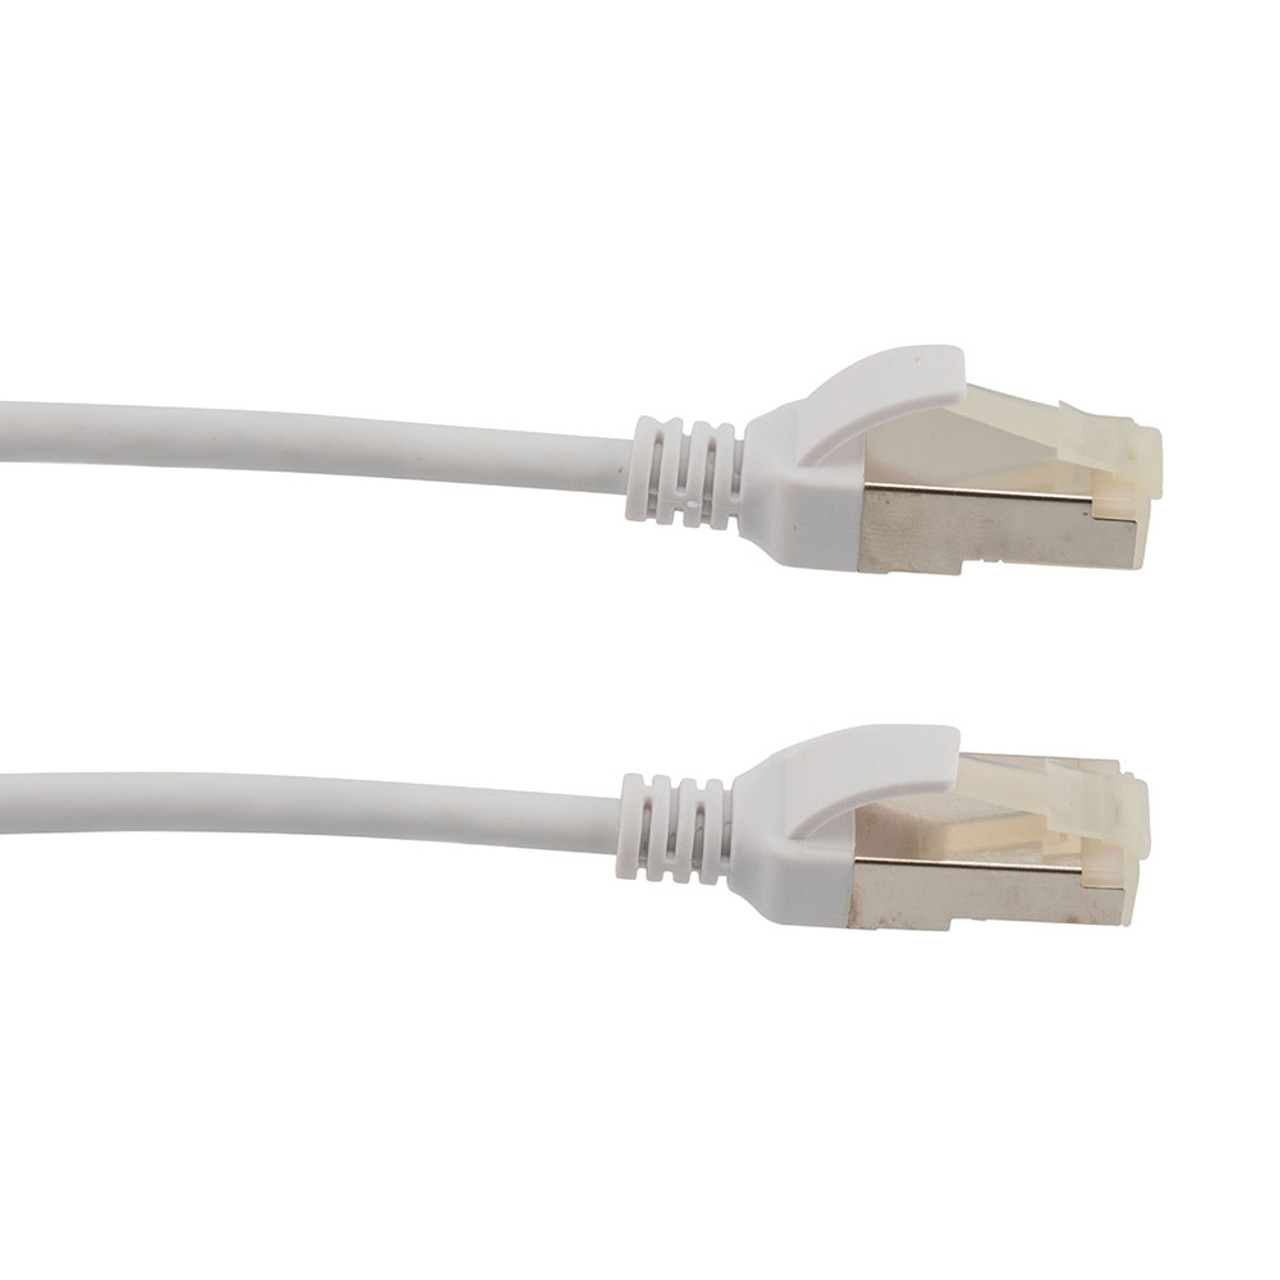 Category 6a 10 Gbps Slim Ethernet Antibacterial Antimicrobial Cable Assembly, RJ45 Male/Plug, S/FTP, 30 AWG, PVC Antibacterial, White, 5 FT